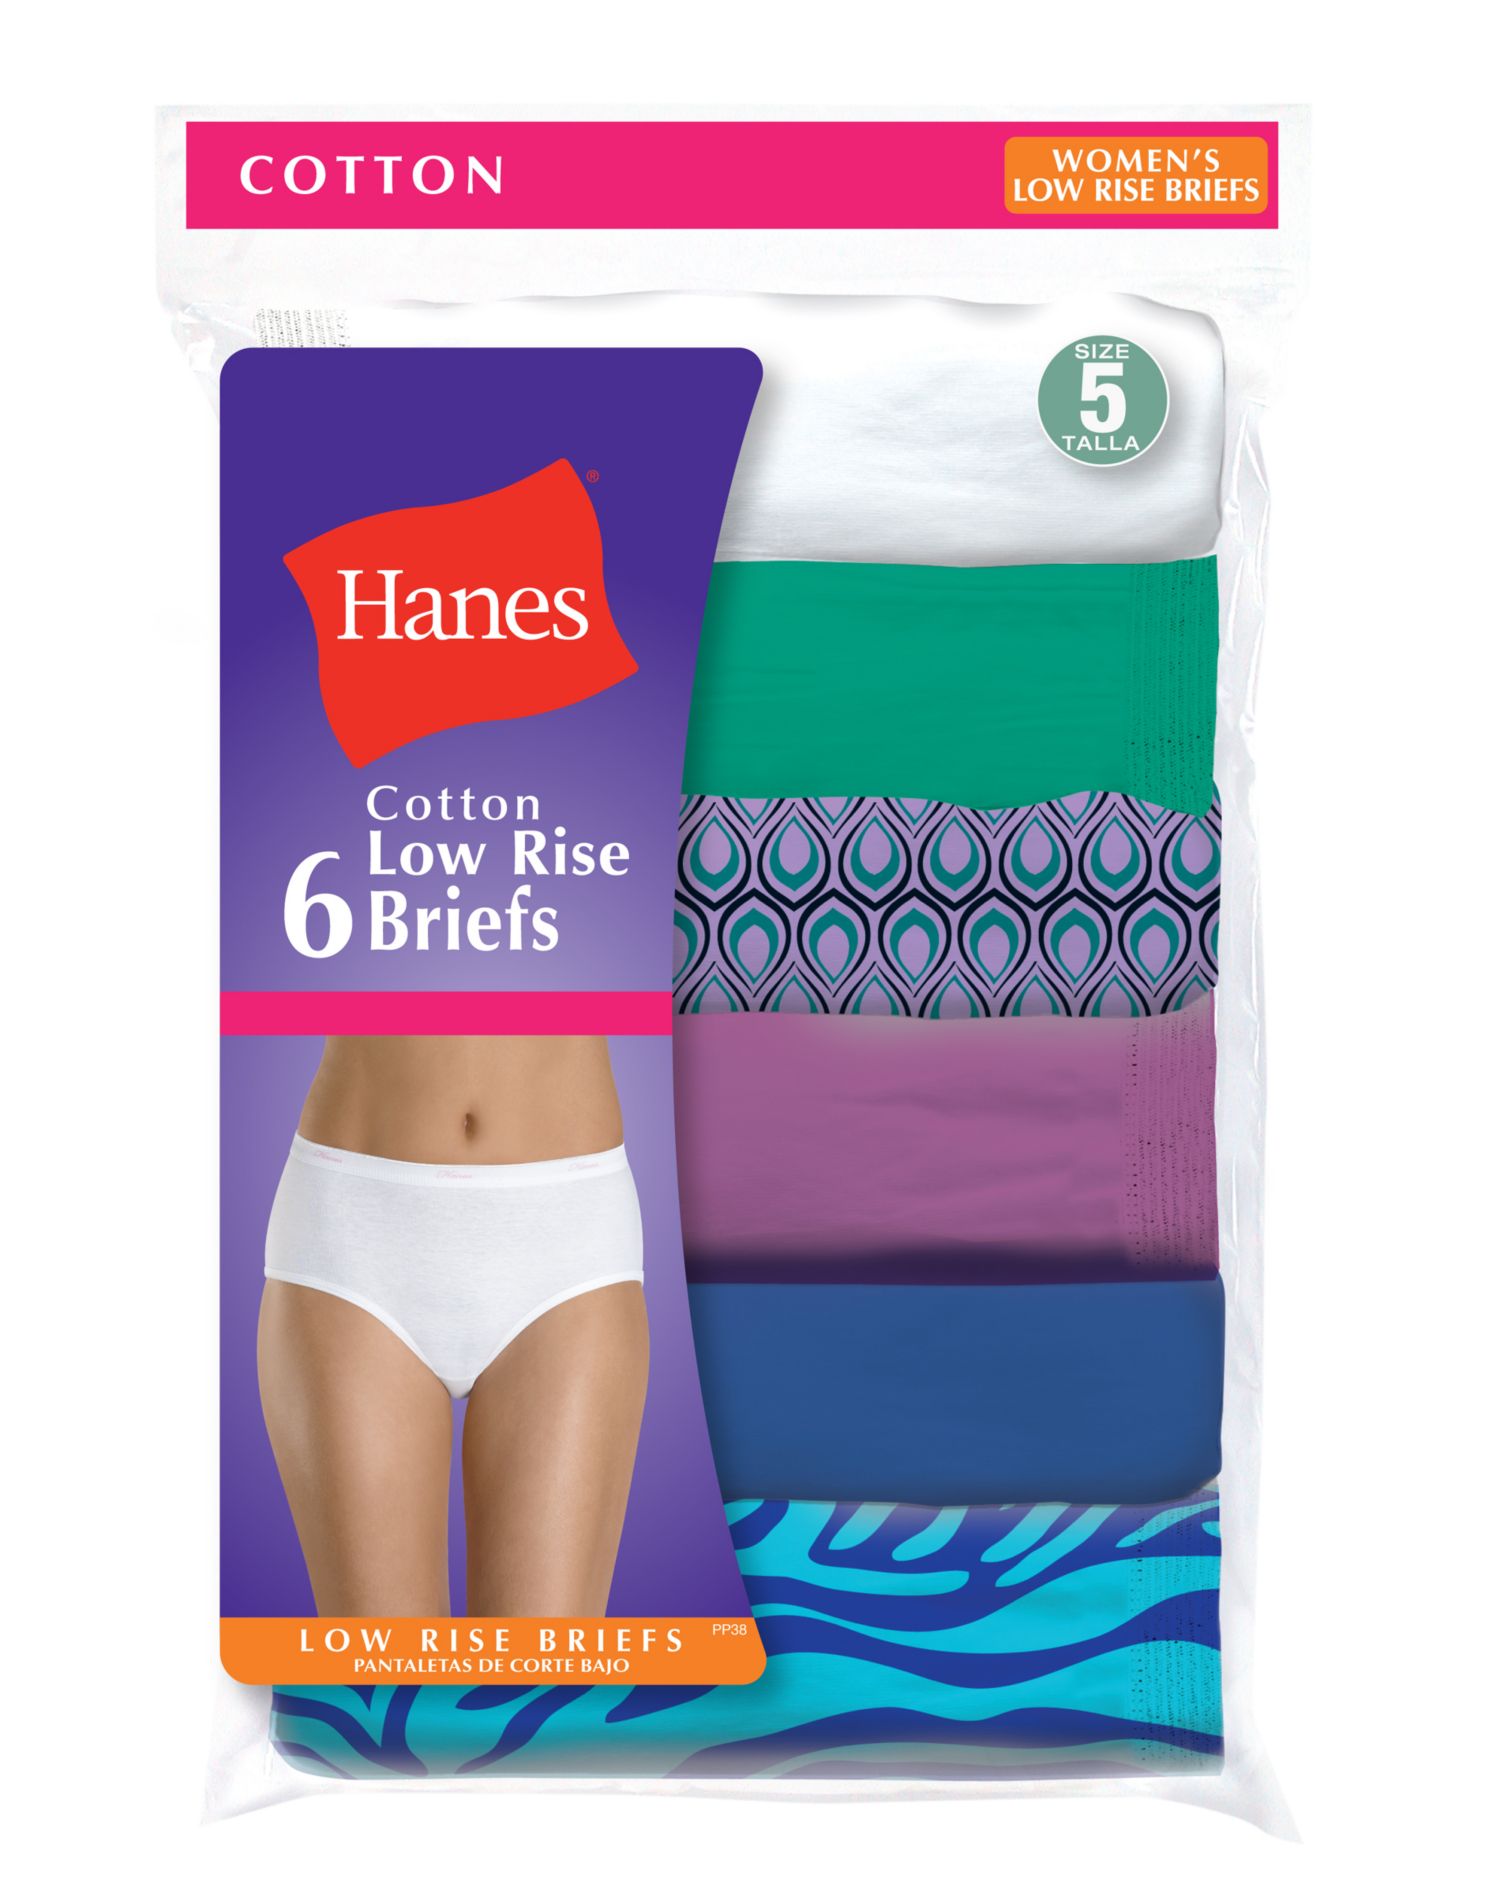 Hanes Girls' Cotton Low Rise Briefs, 10-Pack Assorted 1 6